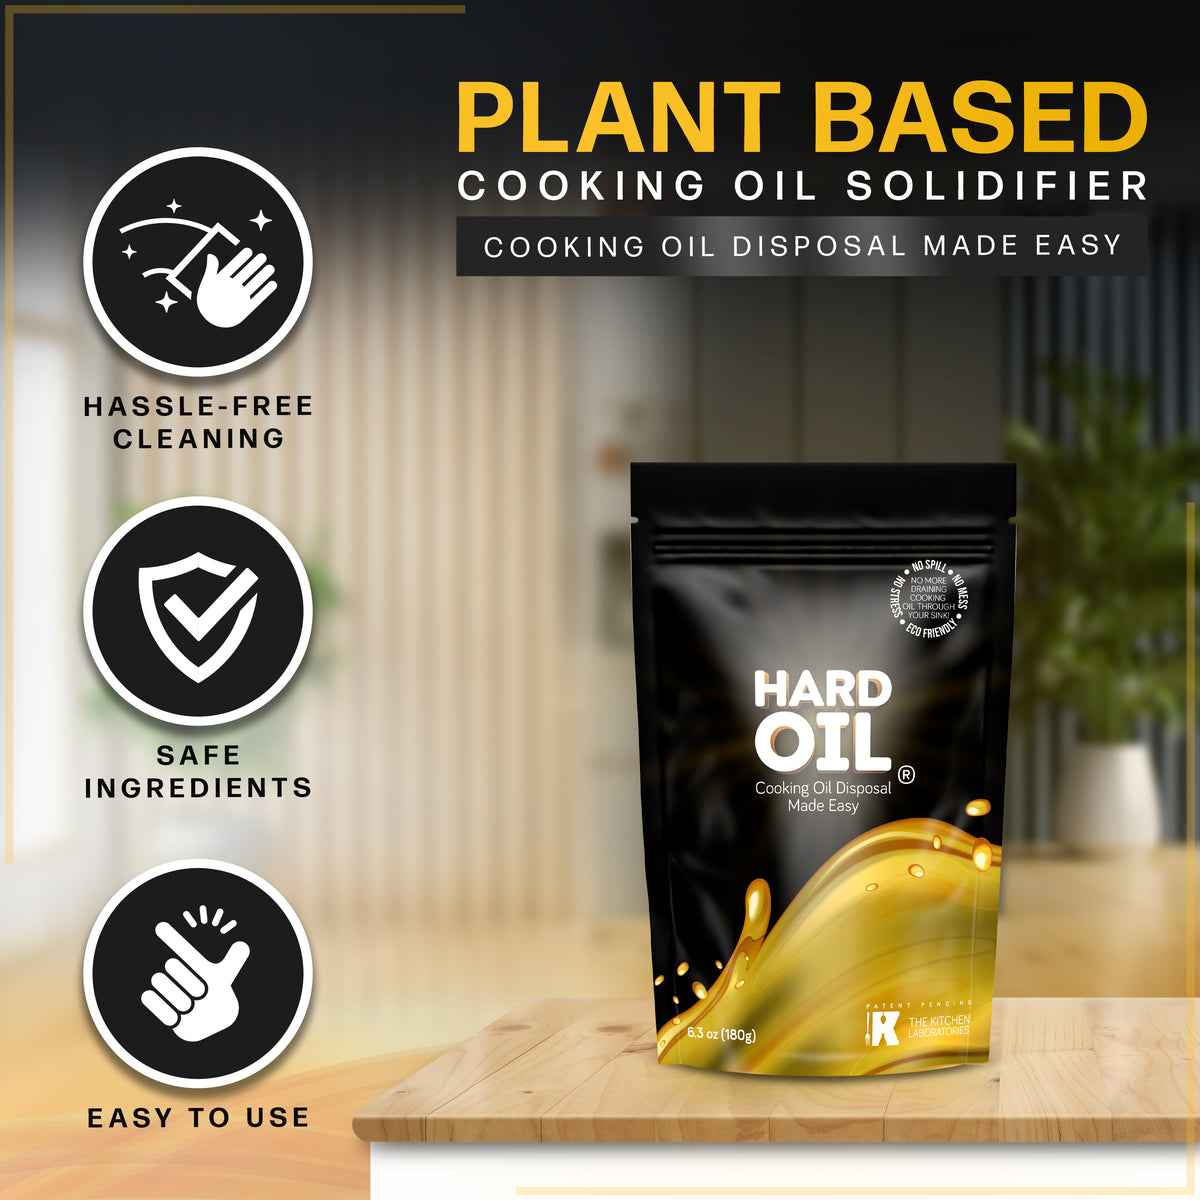  LANBEIDE Cooking Oil Solidifier Powder, Solidifies Up to 36  Cups - 100% Plant-Based Cooking Oil Hardener for Disposal Fry Oil Away from  Mess 13 Oz : Home & Kitchen